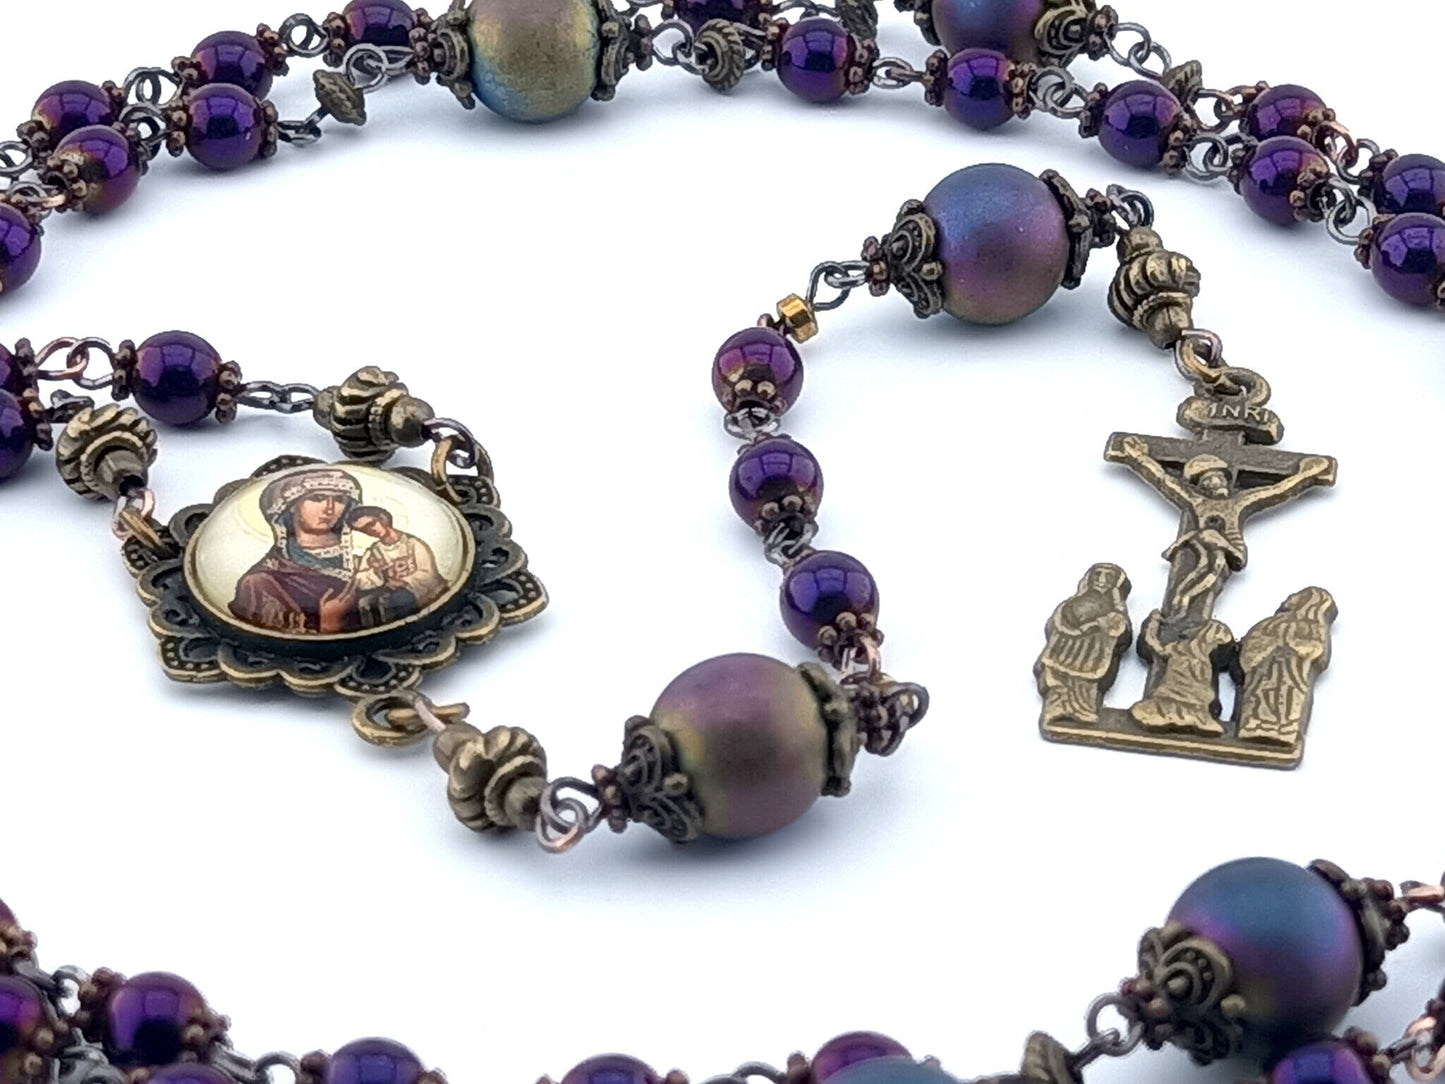 Our Lady of Perpetual Help unique rosary beads with purple hematite beads, bronze two Marys crucifix, picture centre medal and bead caps.